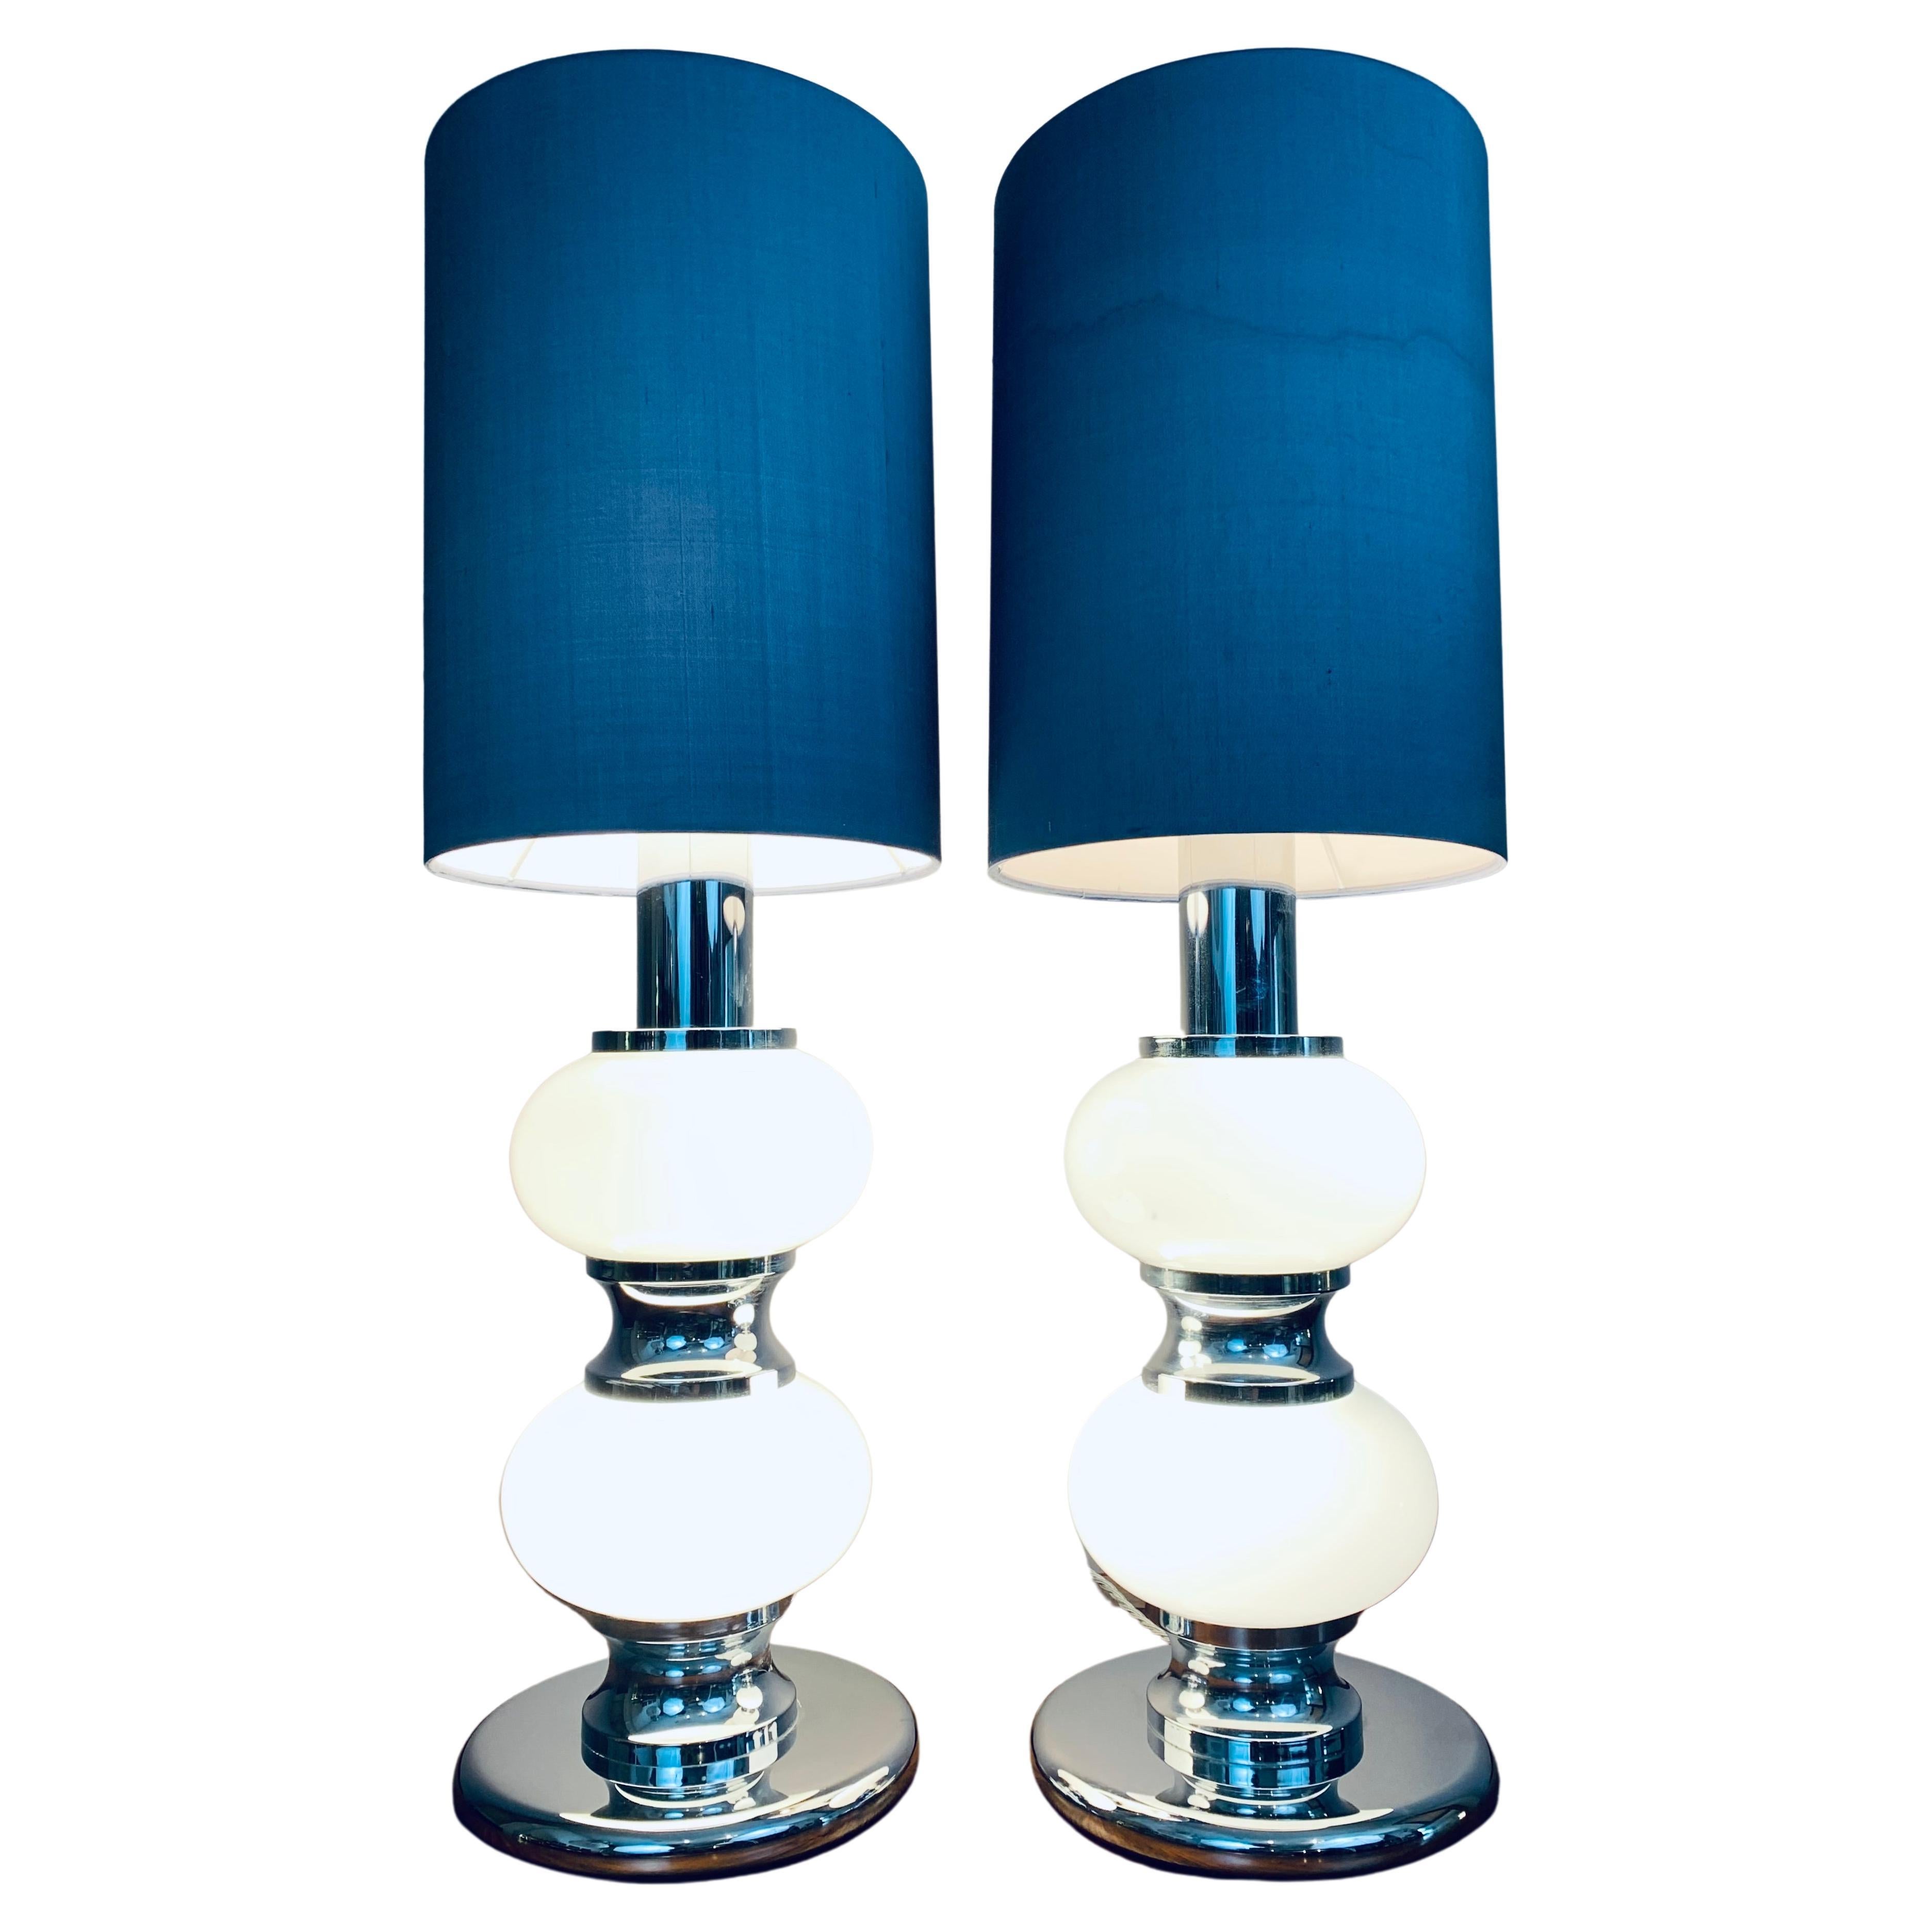 Pair of 1970s German Chrome and White Globe Glass Table Lamps by Solken Leuchten